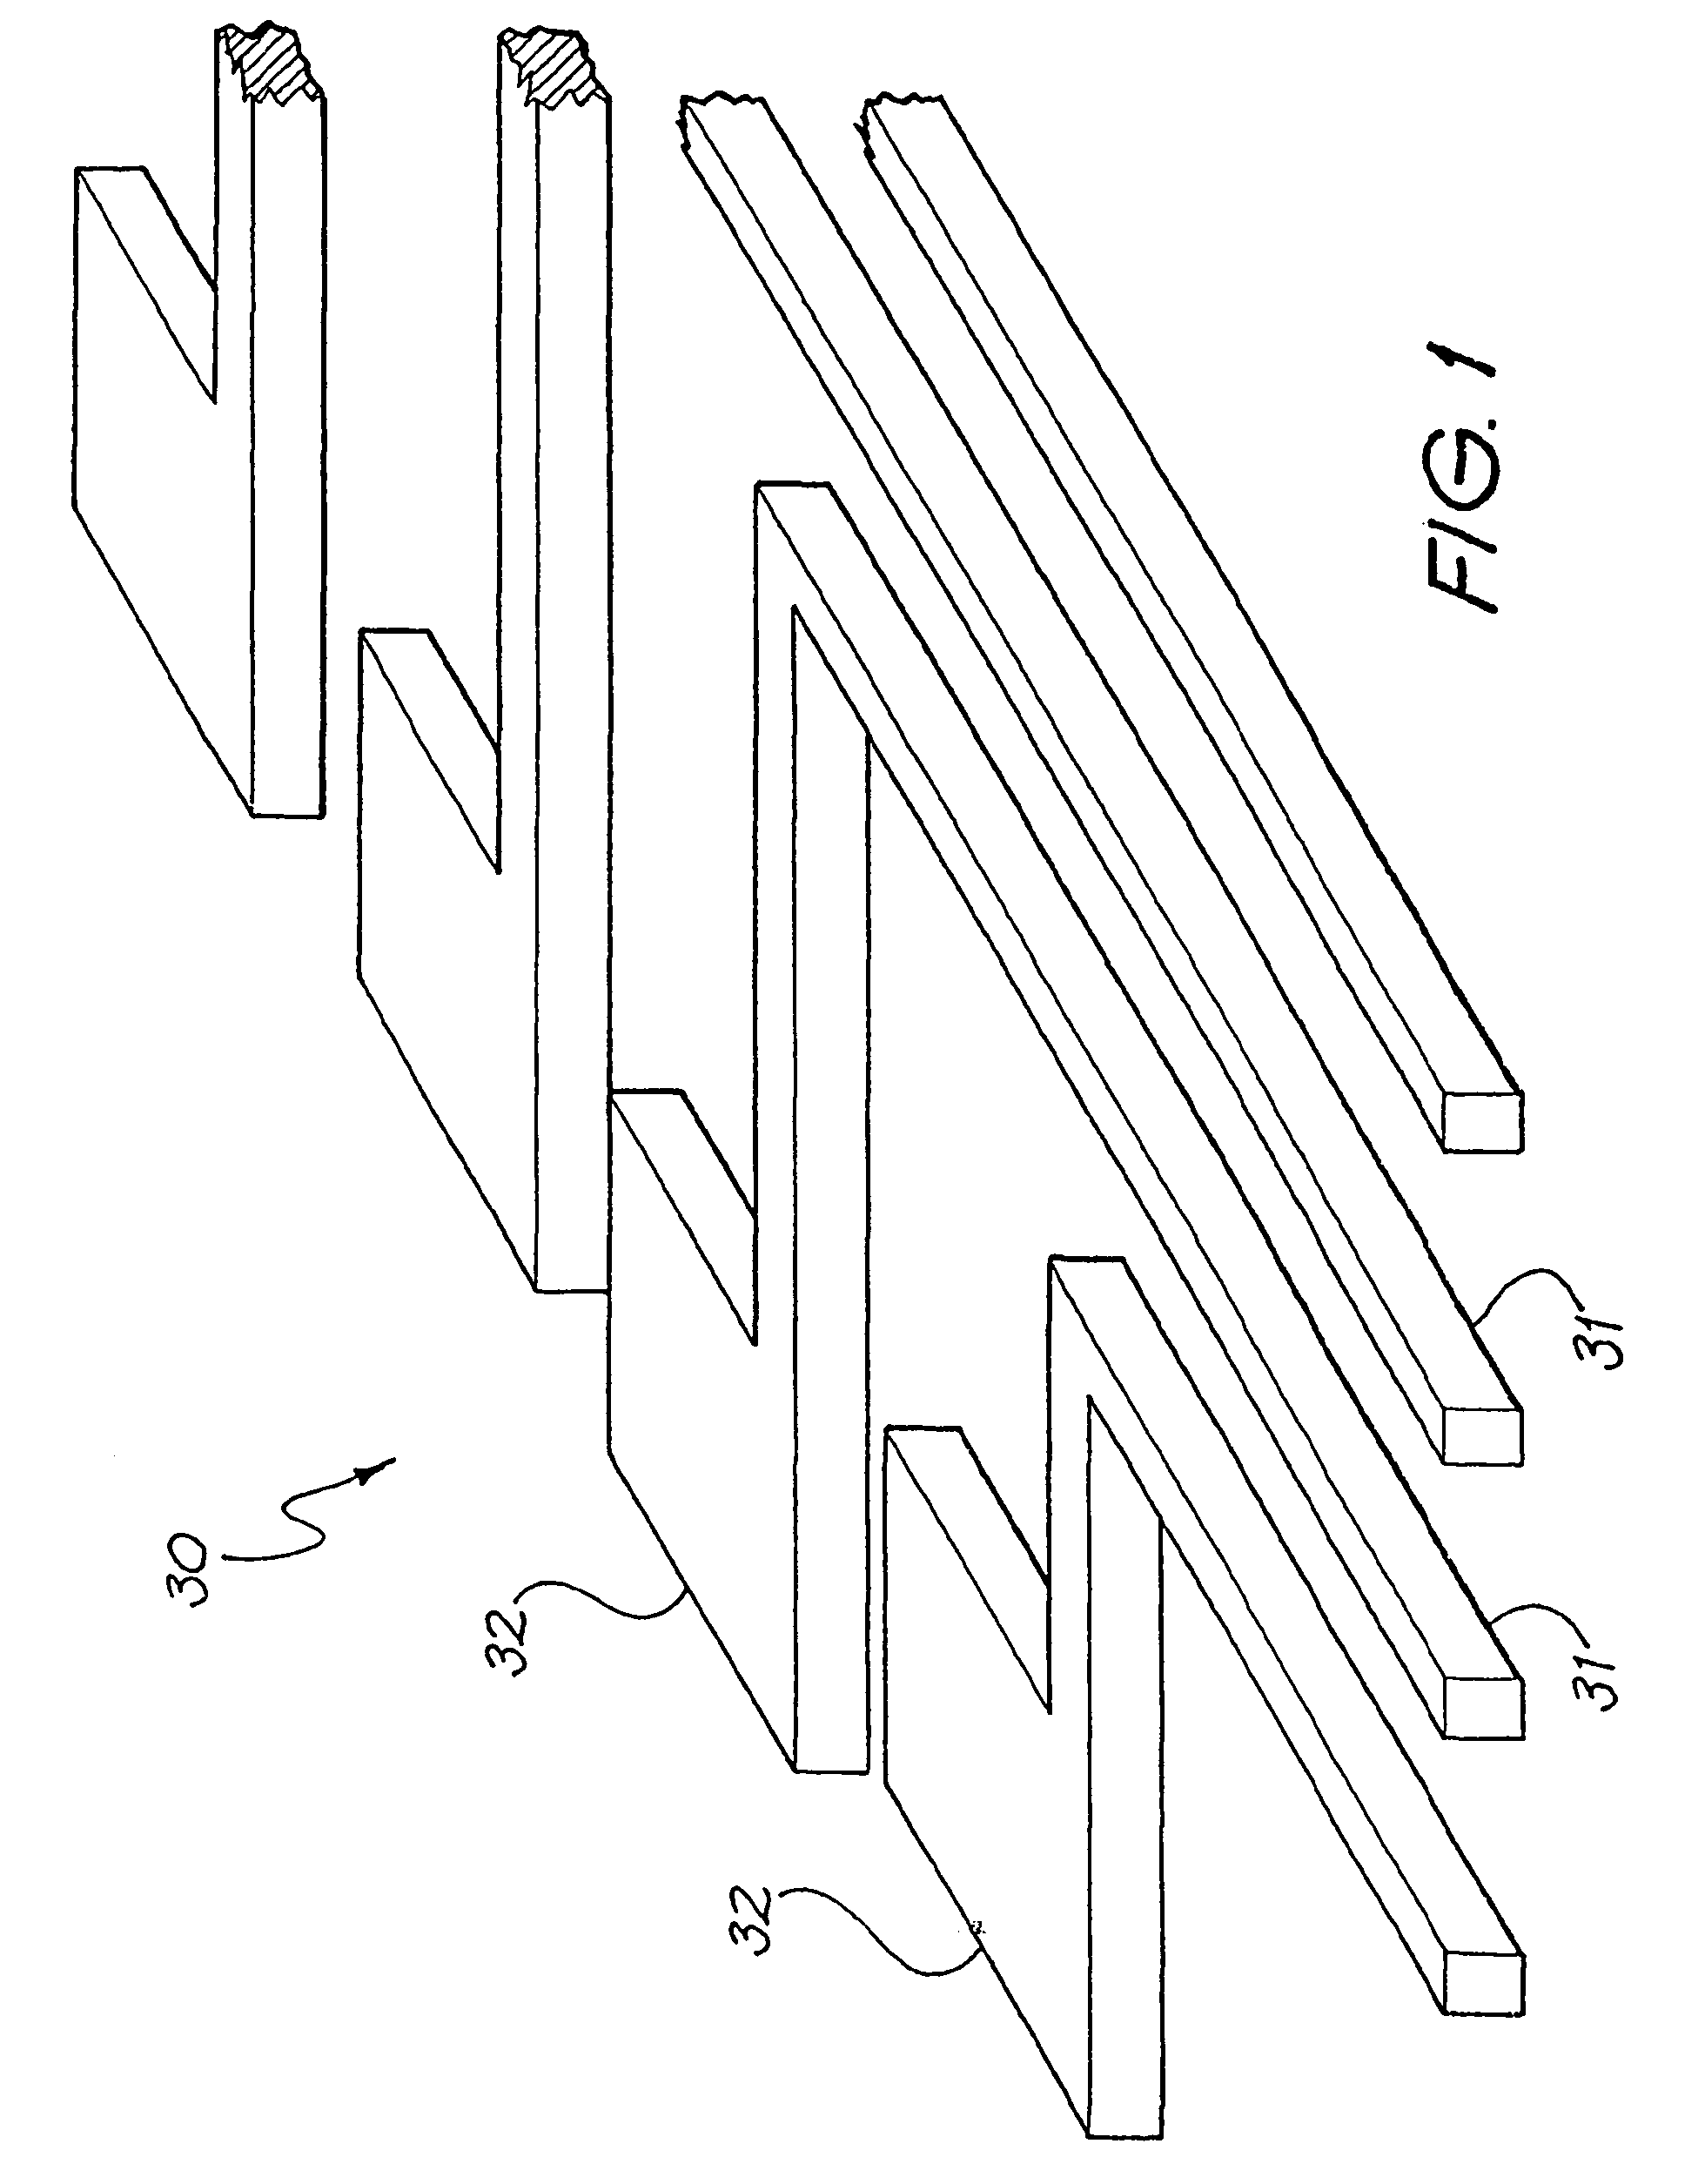 Process for manufacturing electrically conductive components